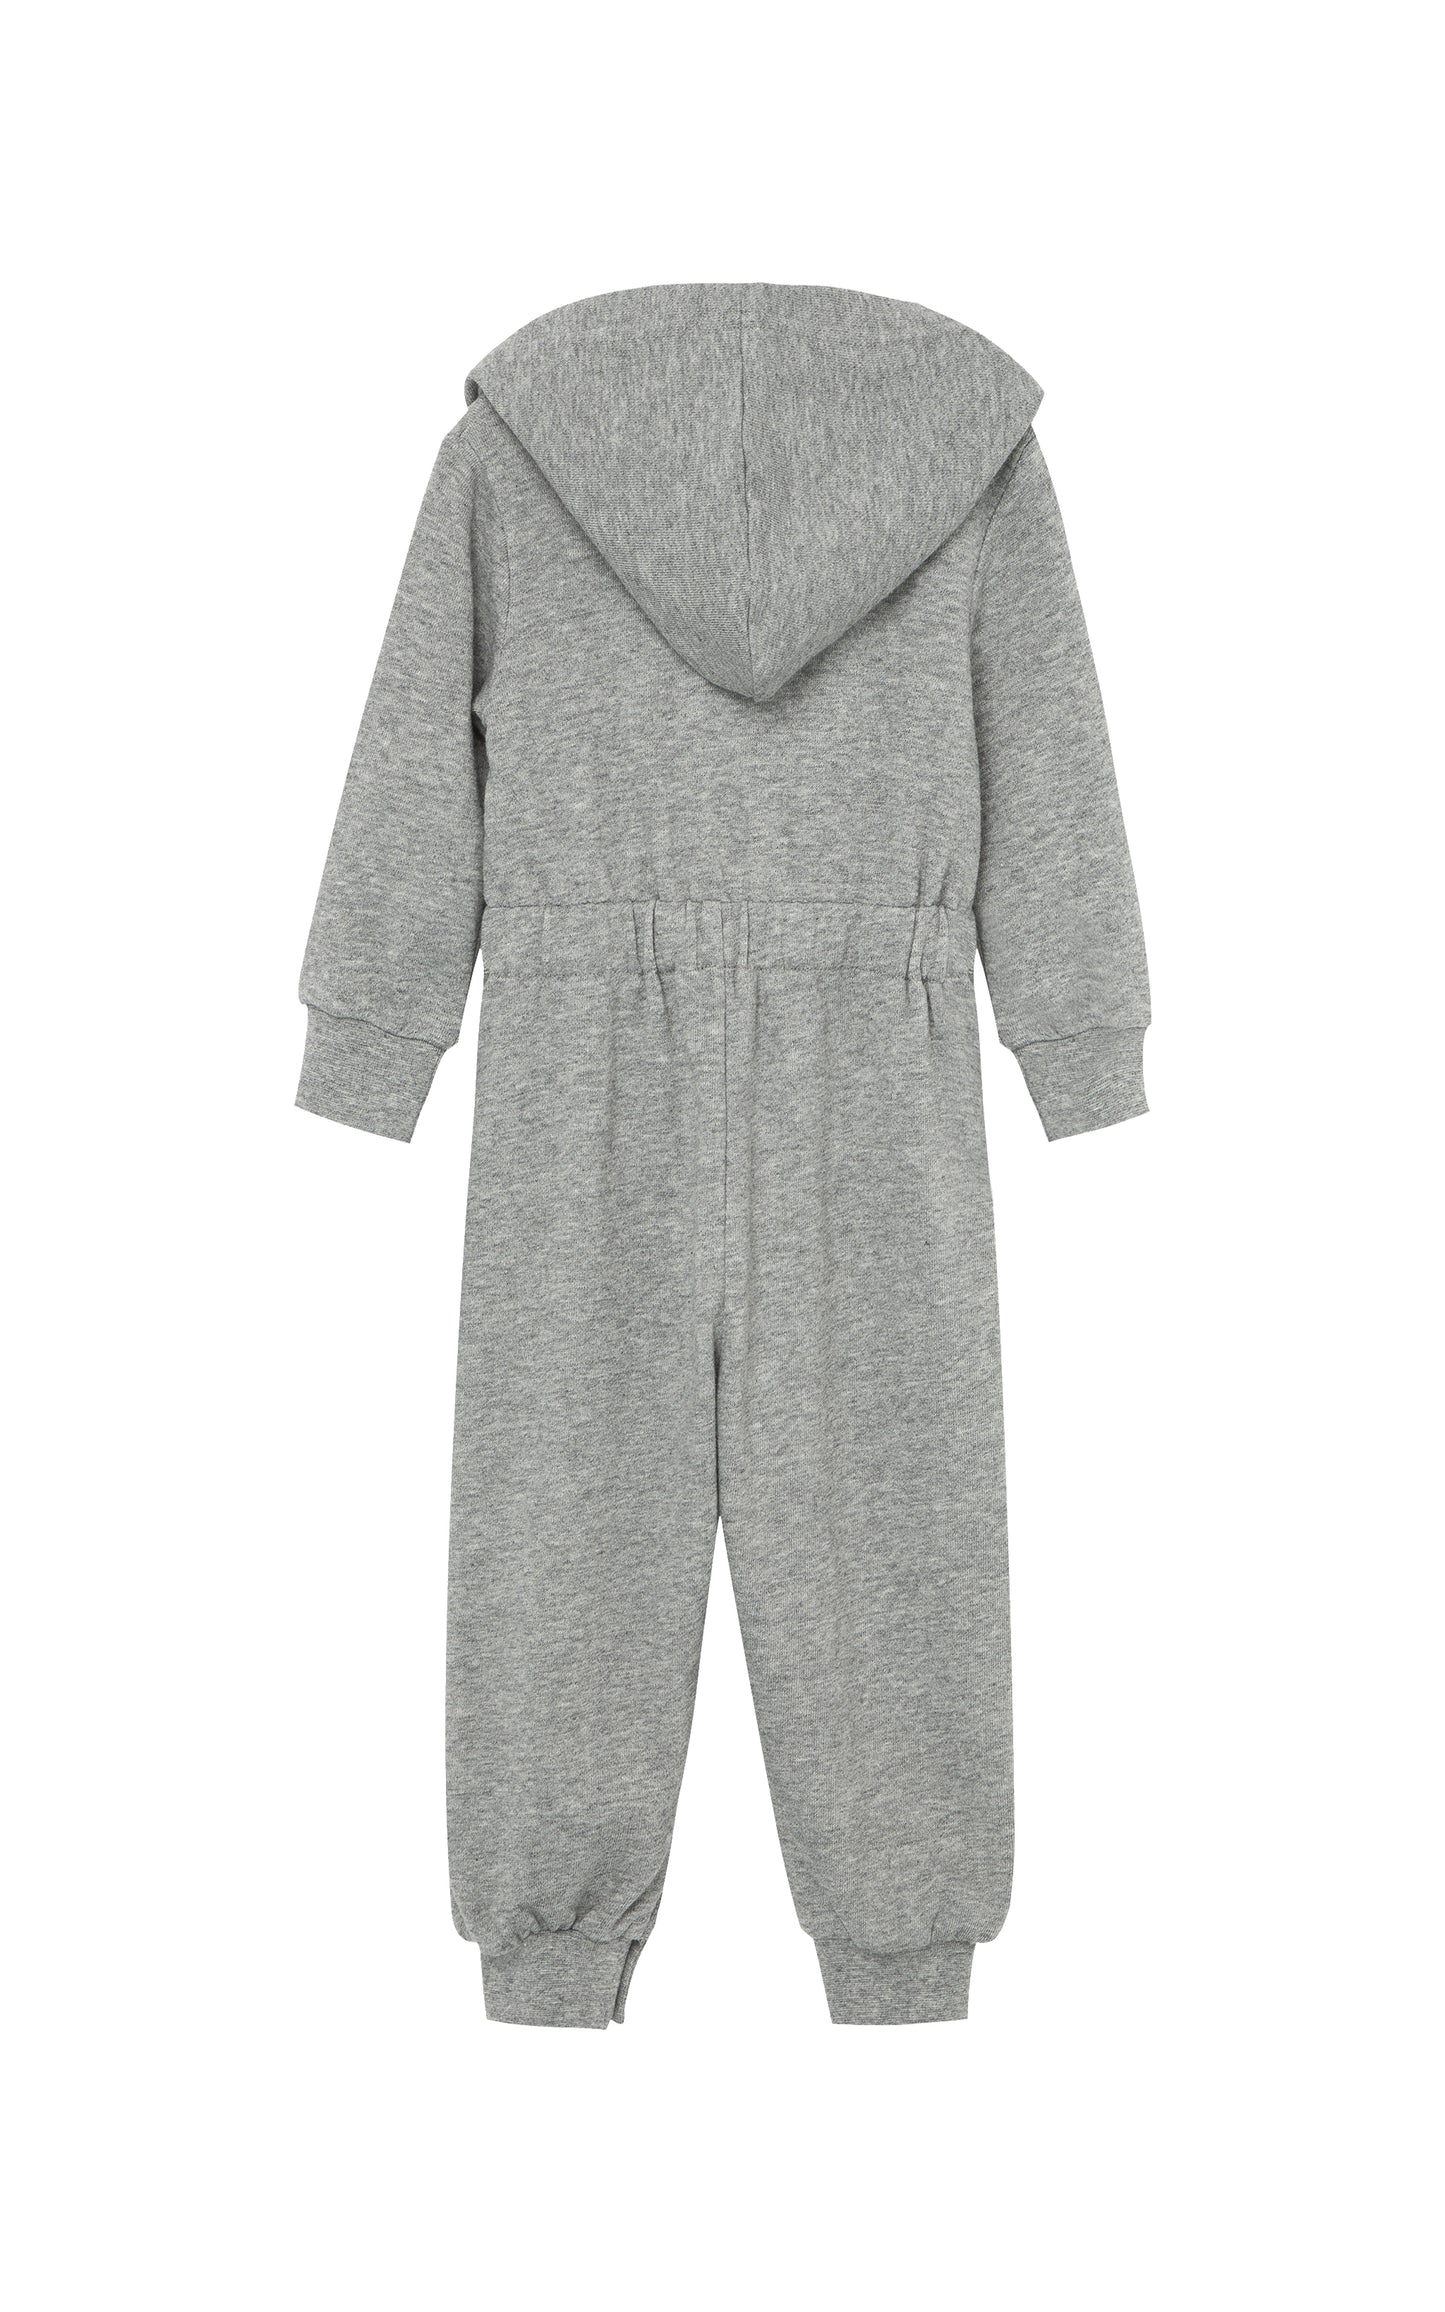 Back view of grey hooded jumpsuit 